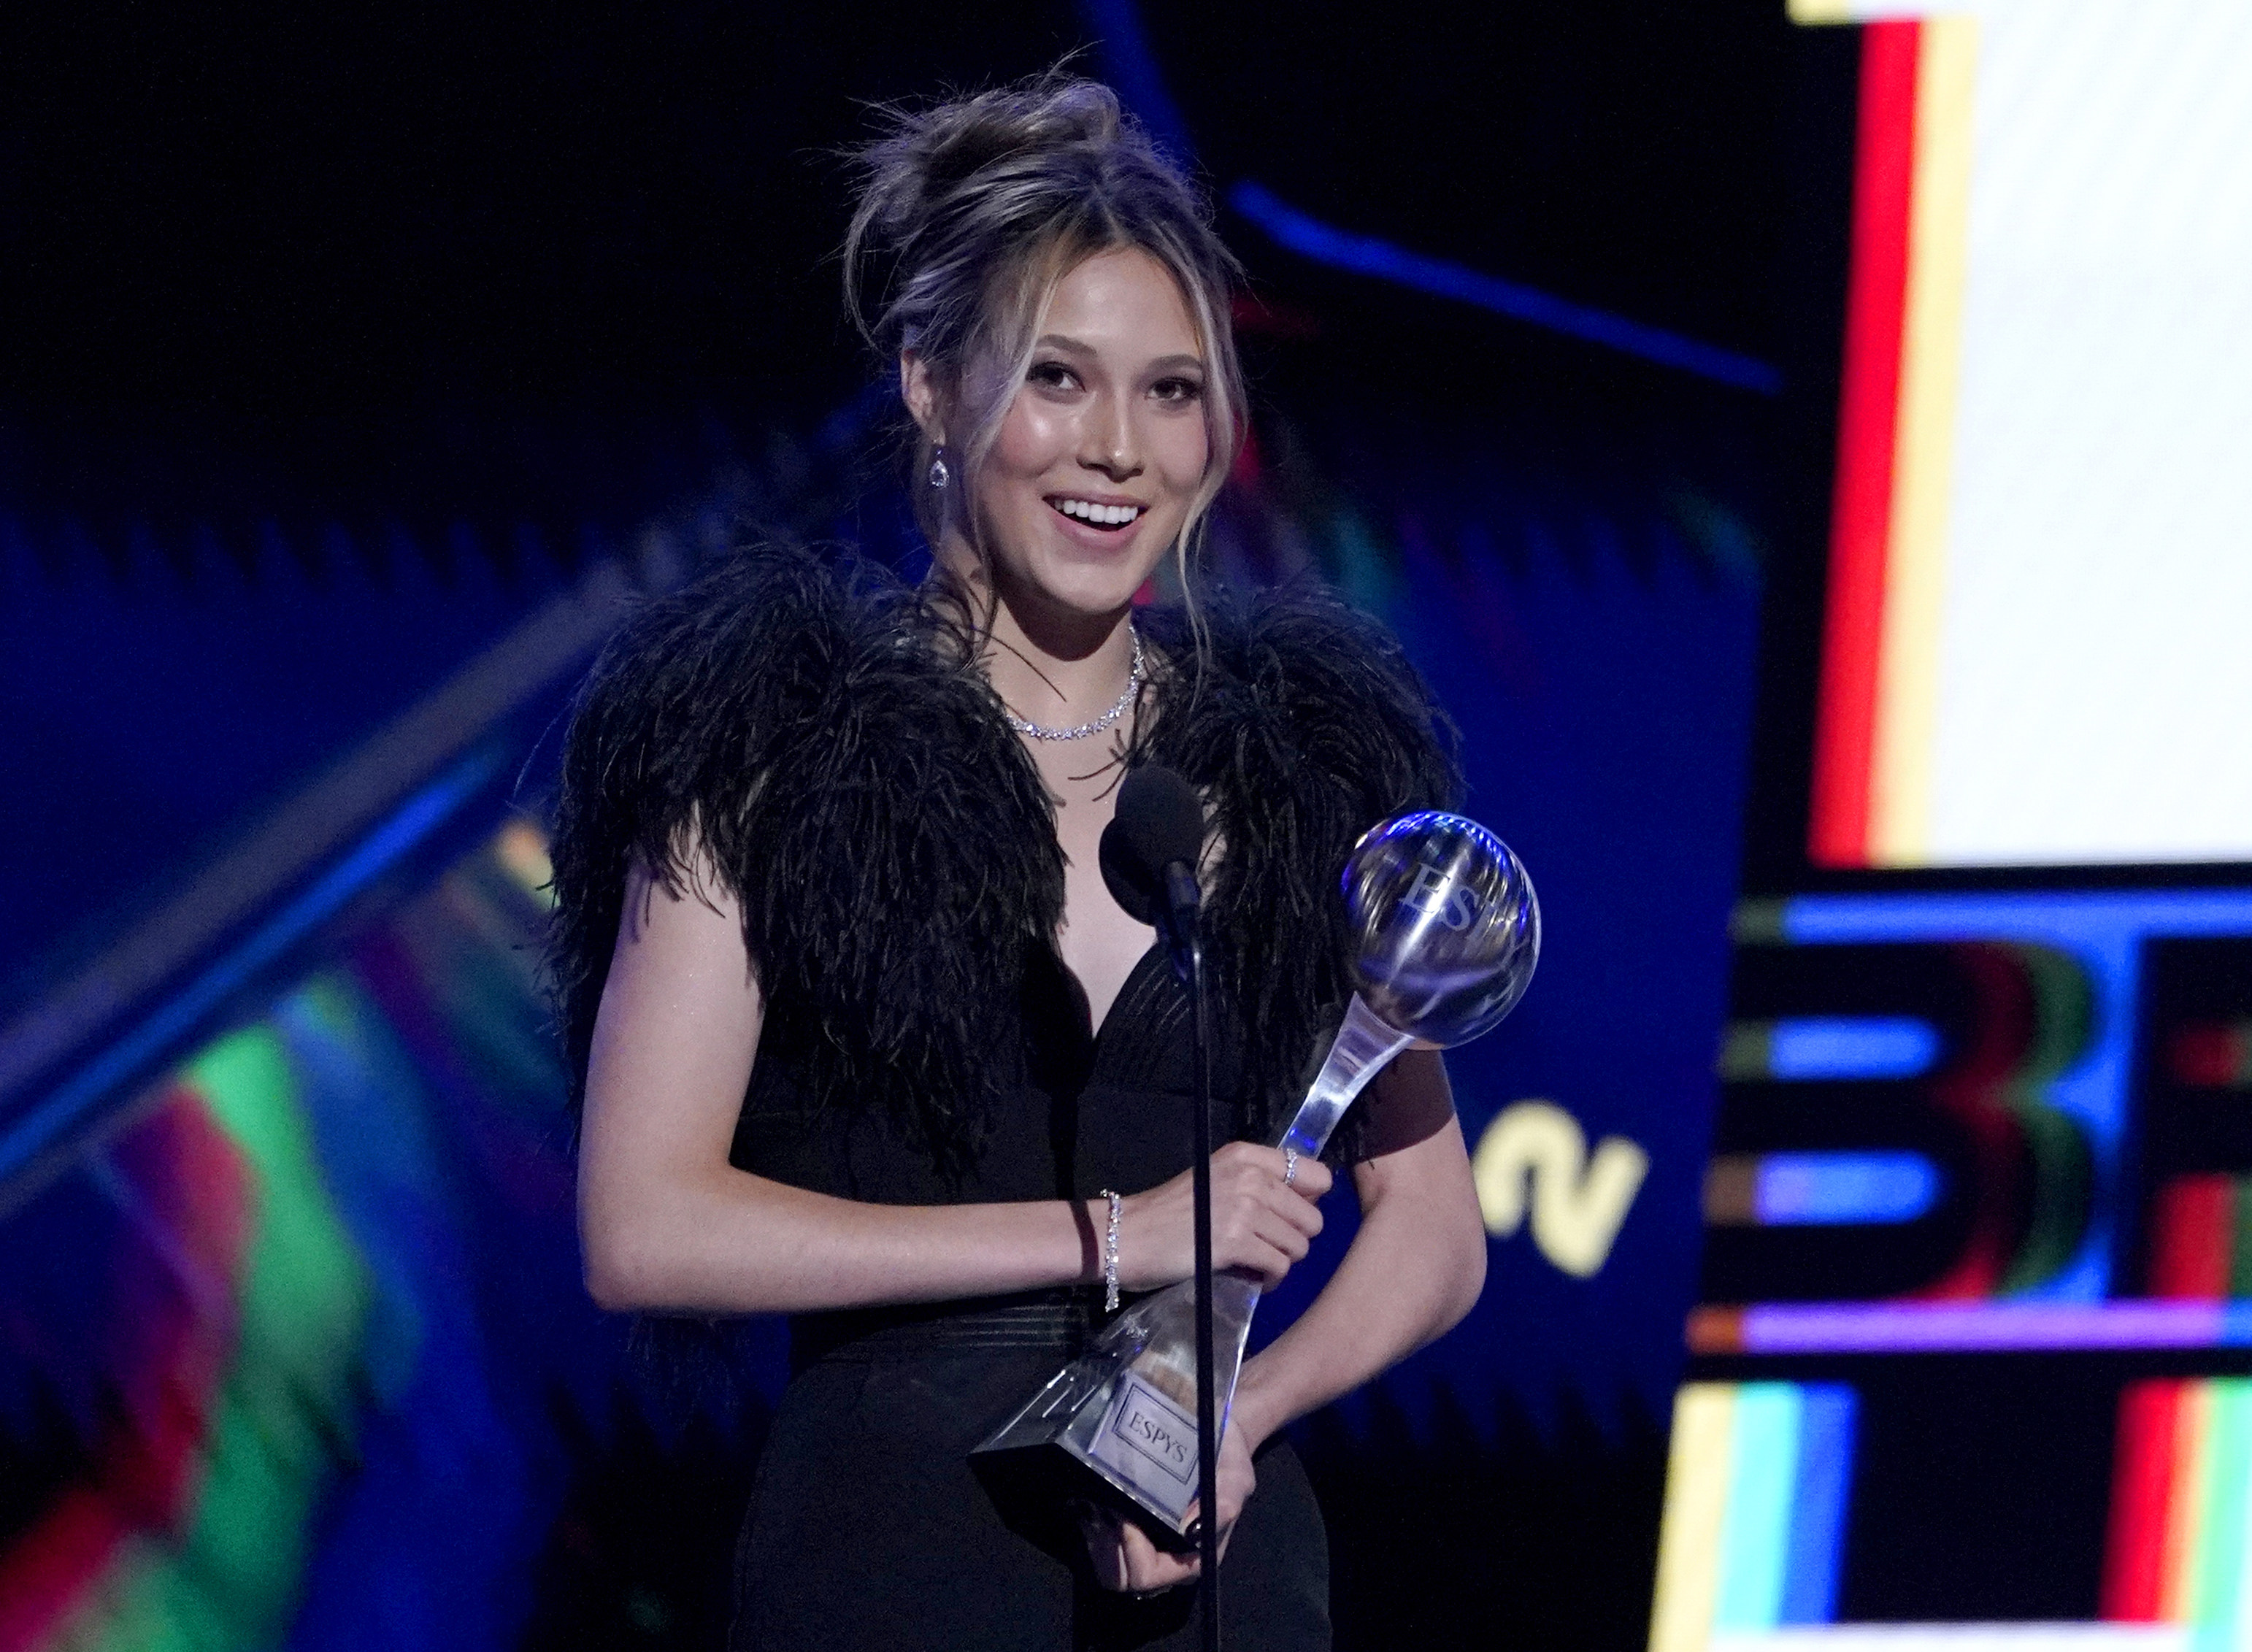 Freestyle skier Eileen Gu accepts the award for best breakthrough athlete at the ESPY Awards on July 20, 2022, at the Dolby Theatre in Los Angeles. Photo: AP